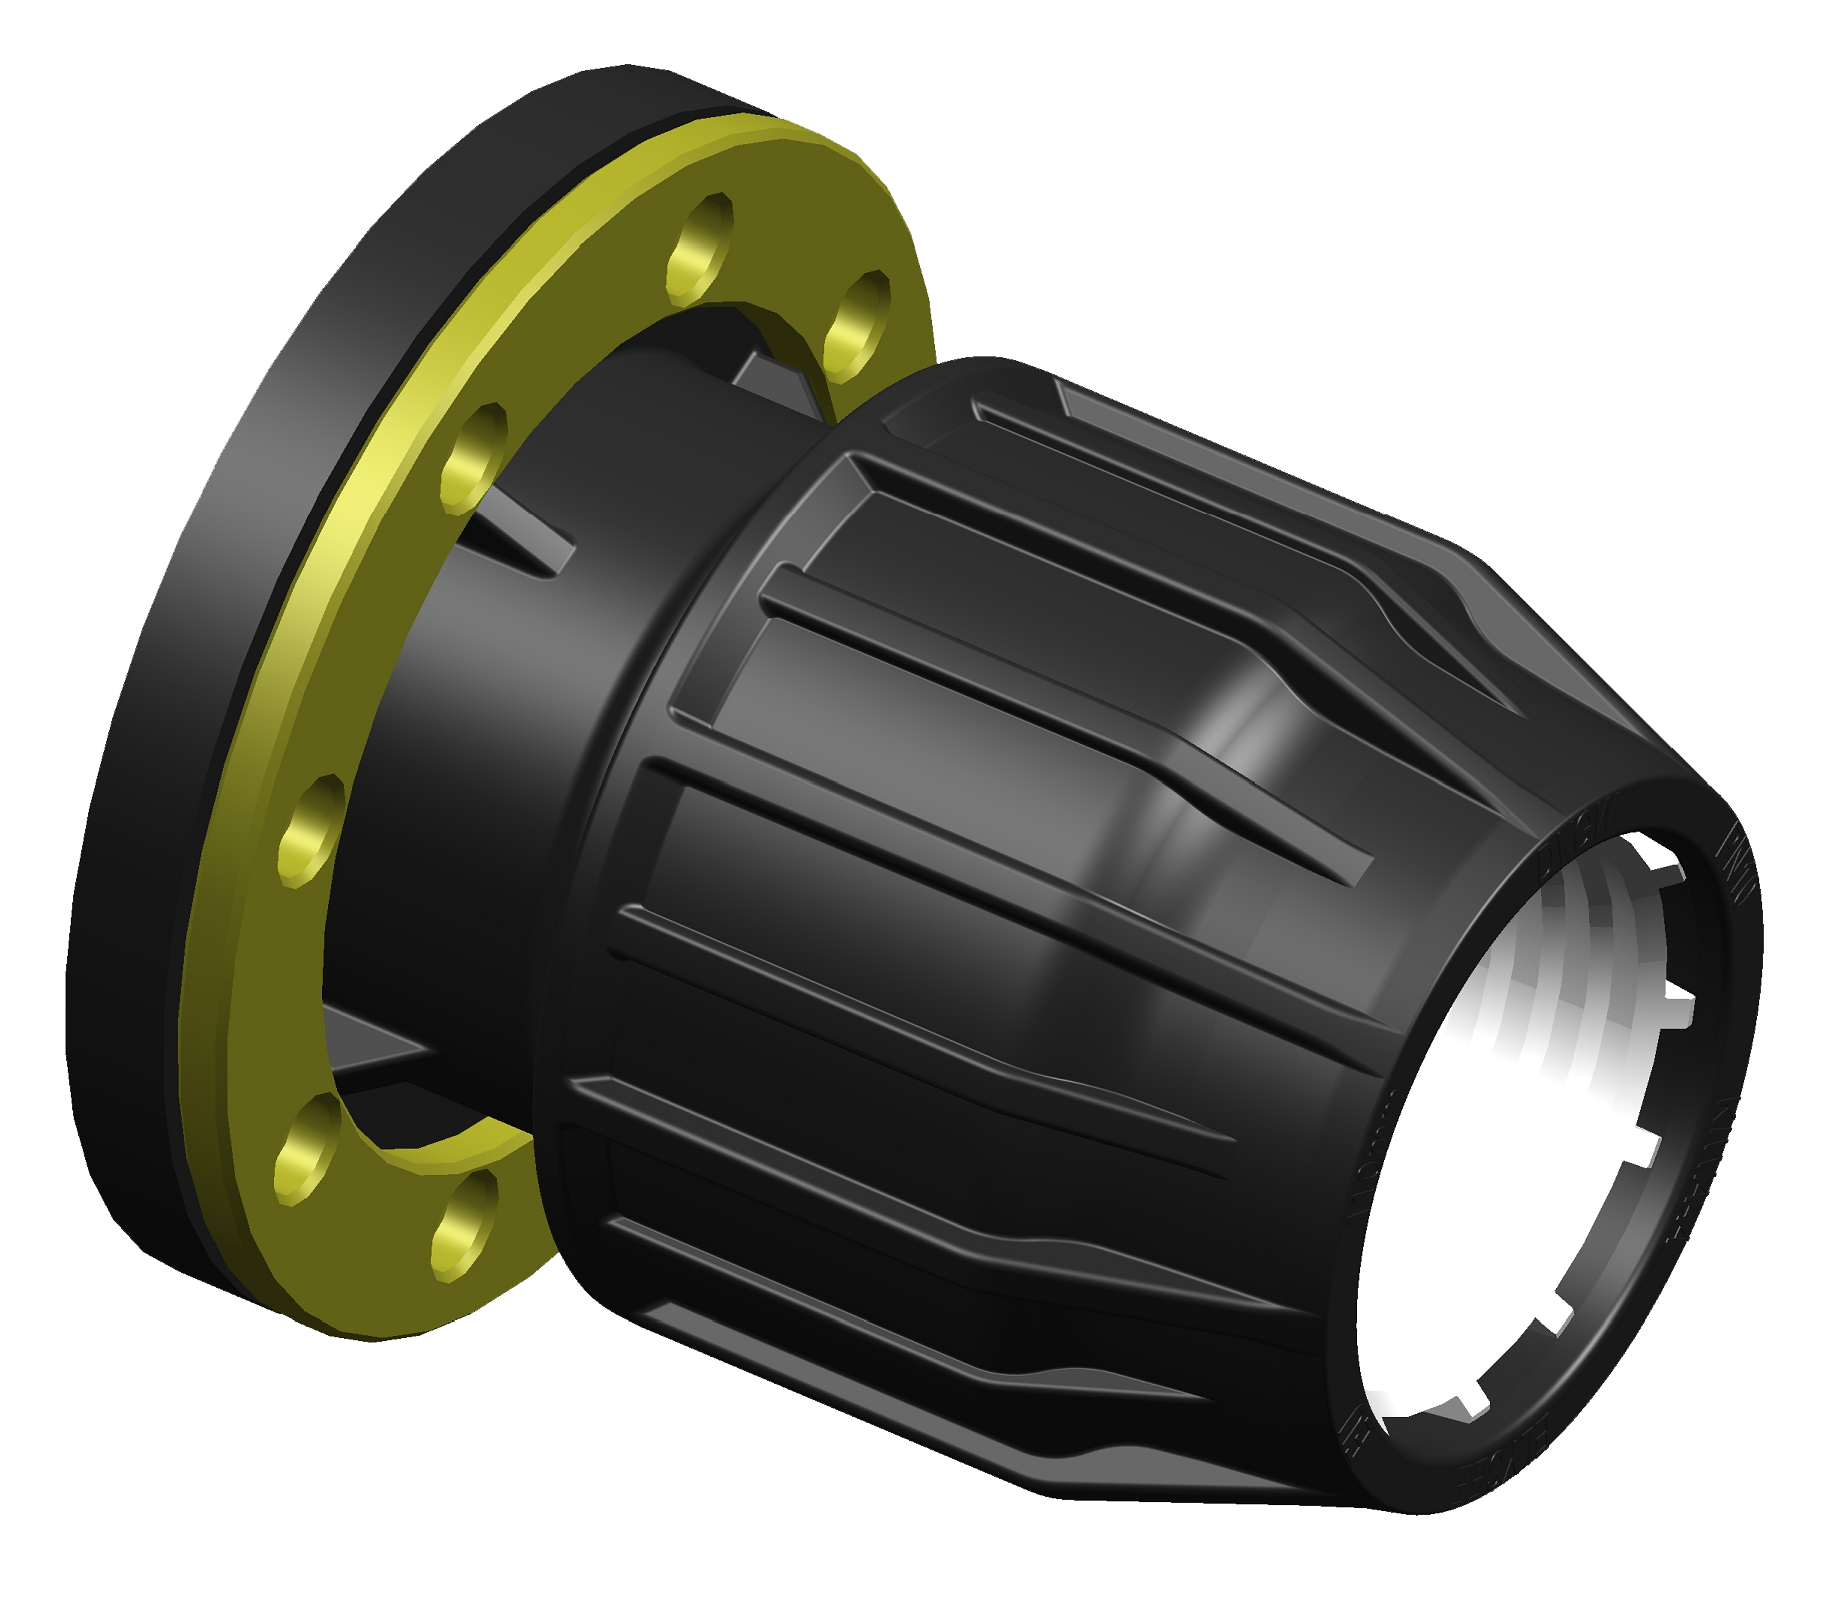 A 3D rendering of a metric compression flanged adaptor.